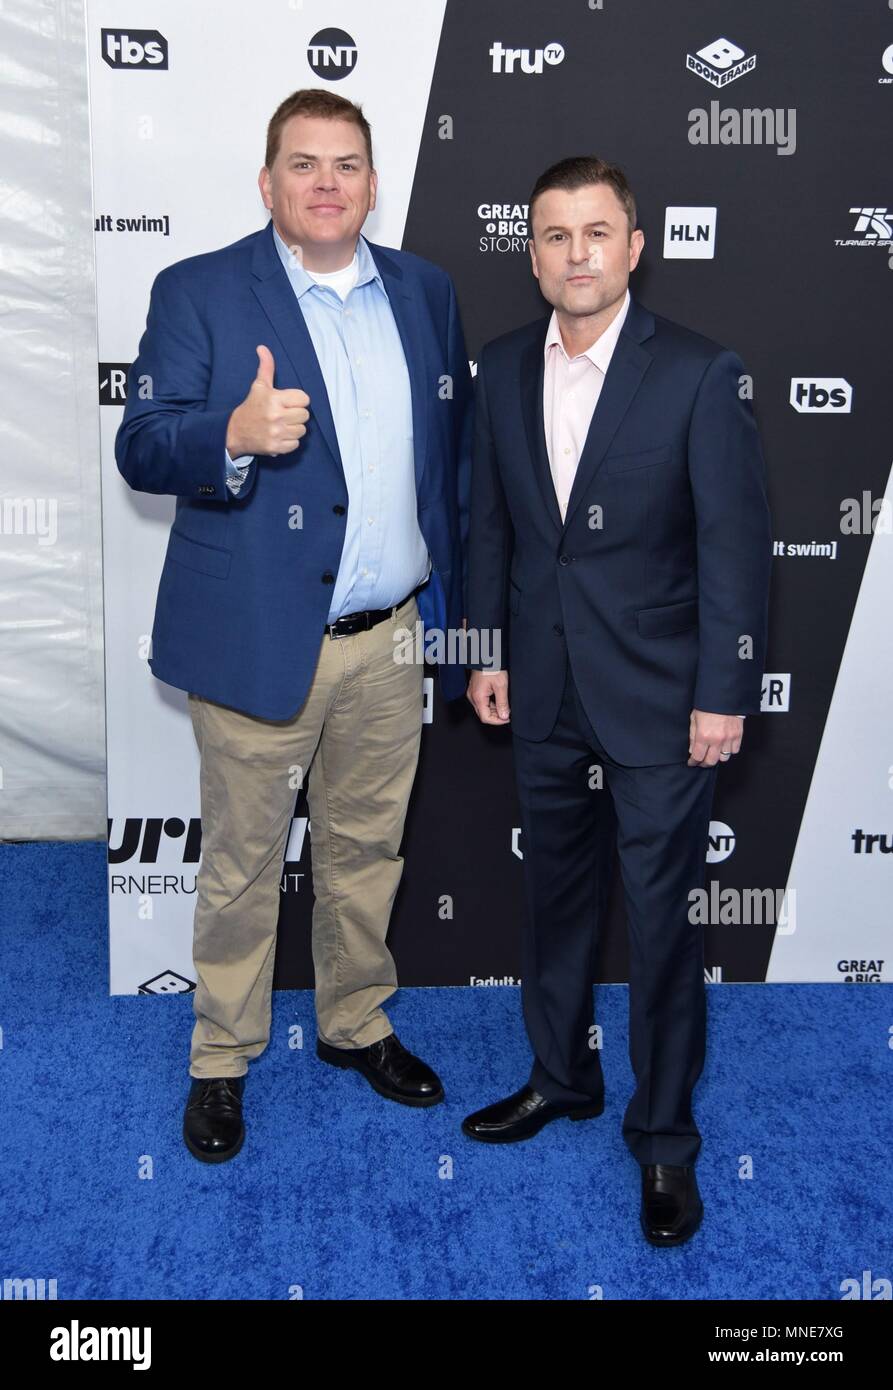 New York, NY, USA. 16th May, 2018. Steve Lemme, Kevin Heffernan at arrivals for 2018 Turner Upfront Presentation, Madison Square Garden, New York, NY May 16, 2018. Credit: Derek Storm/Everett Collection/Alamy Live News Stock Photo